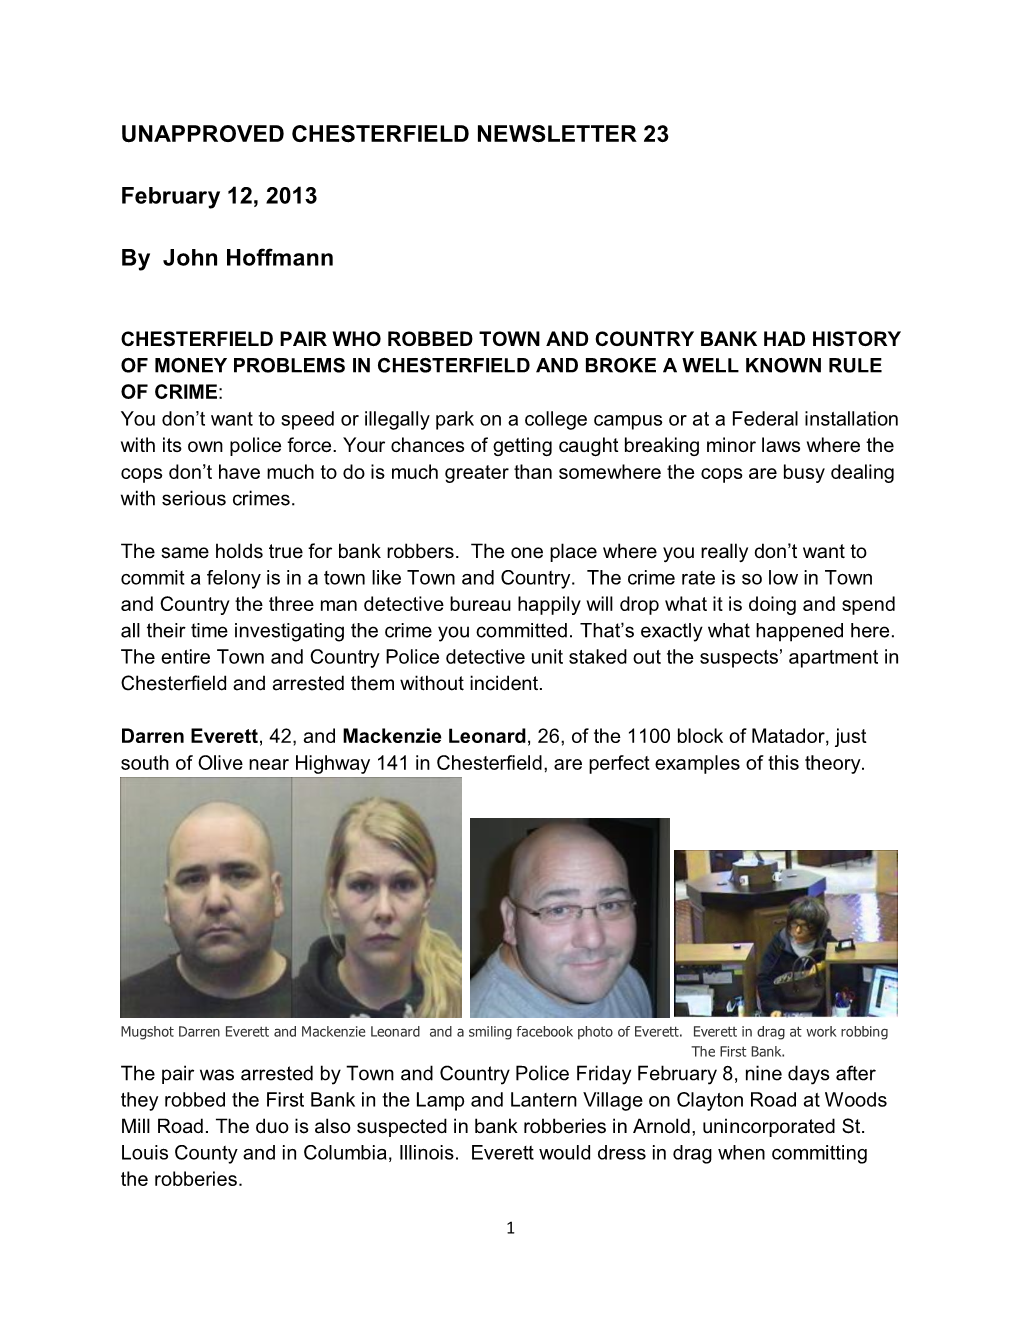 Unapproved Chesterfield Newsletter 23, February 12, 2013